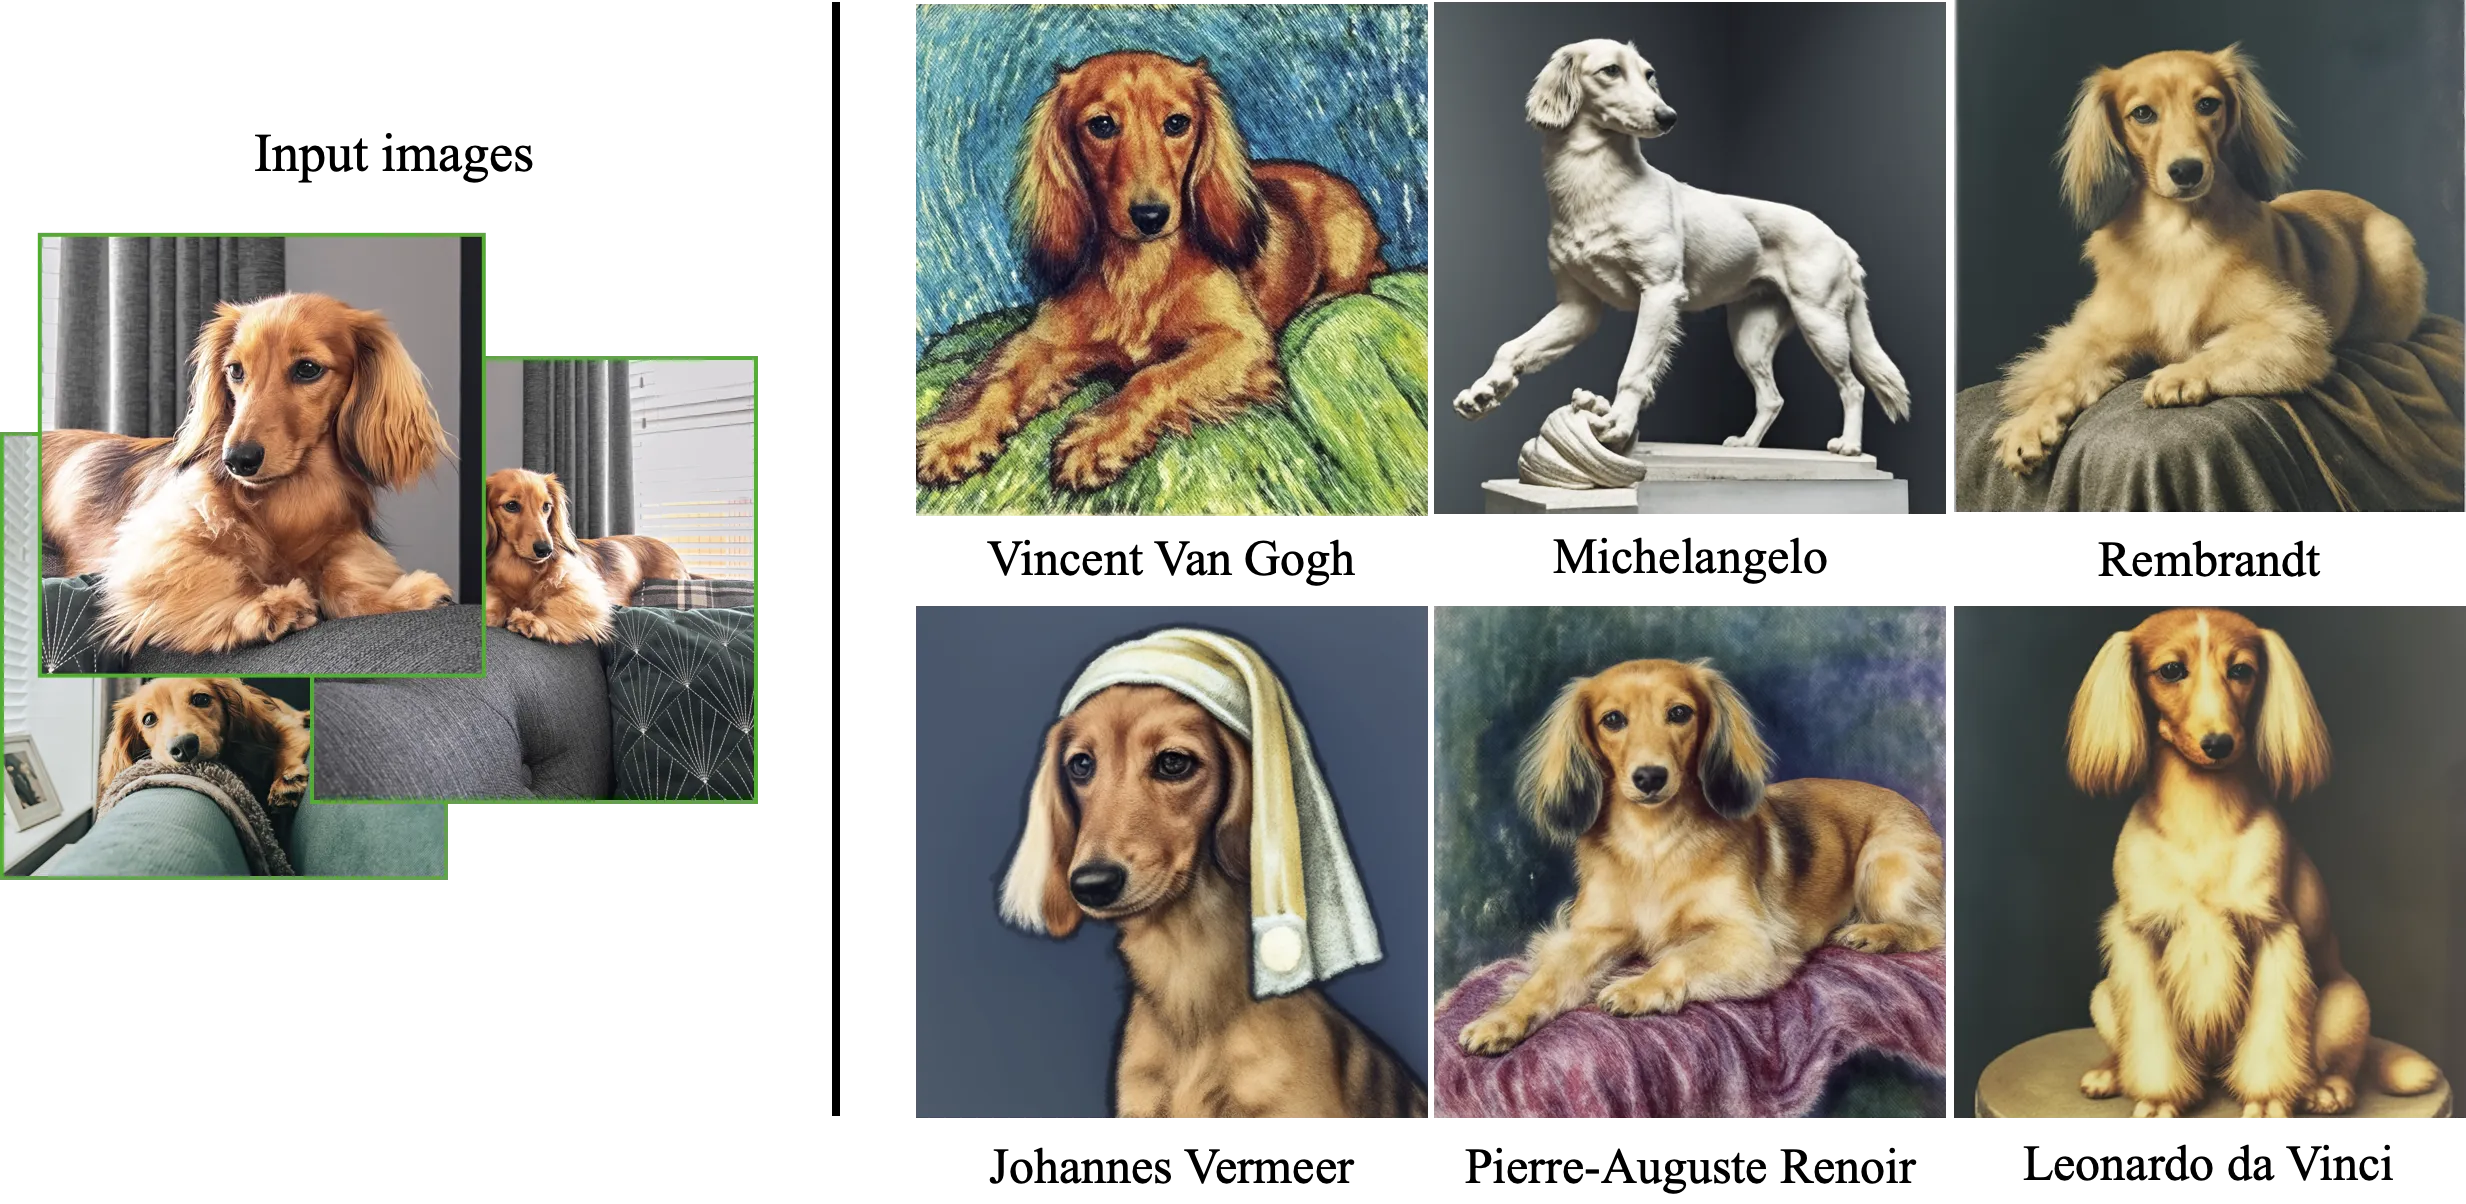 5-dog photos in, endless generated images out. The dataset for these lives here: https://github.com/google/dreambooth/tree/main/dataset/dog5